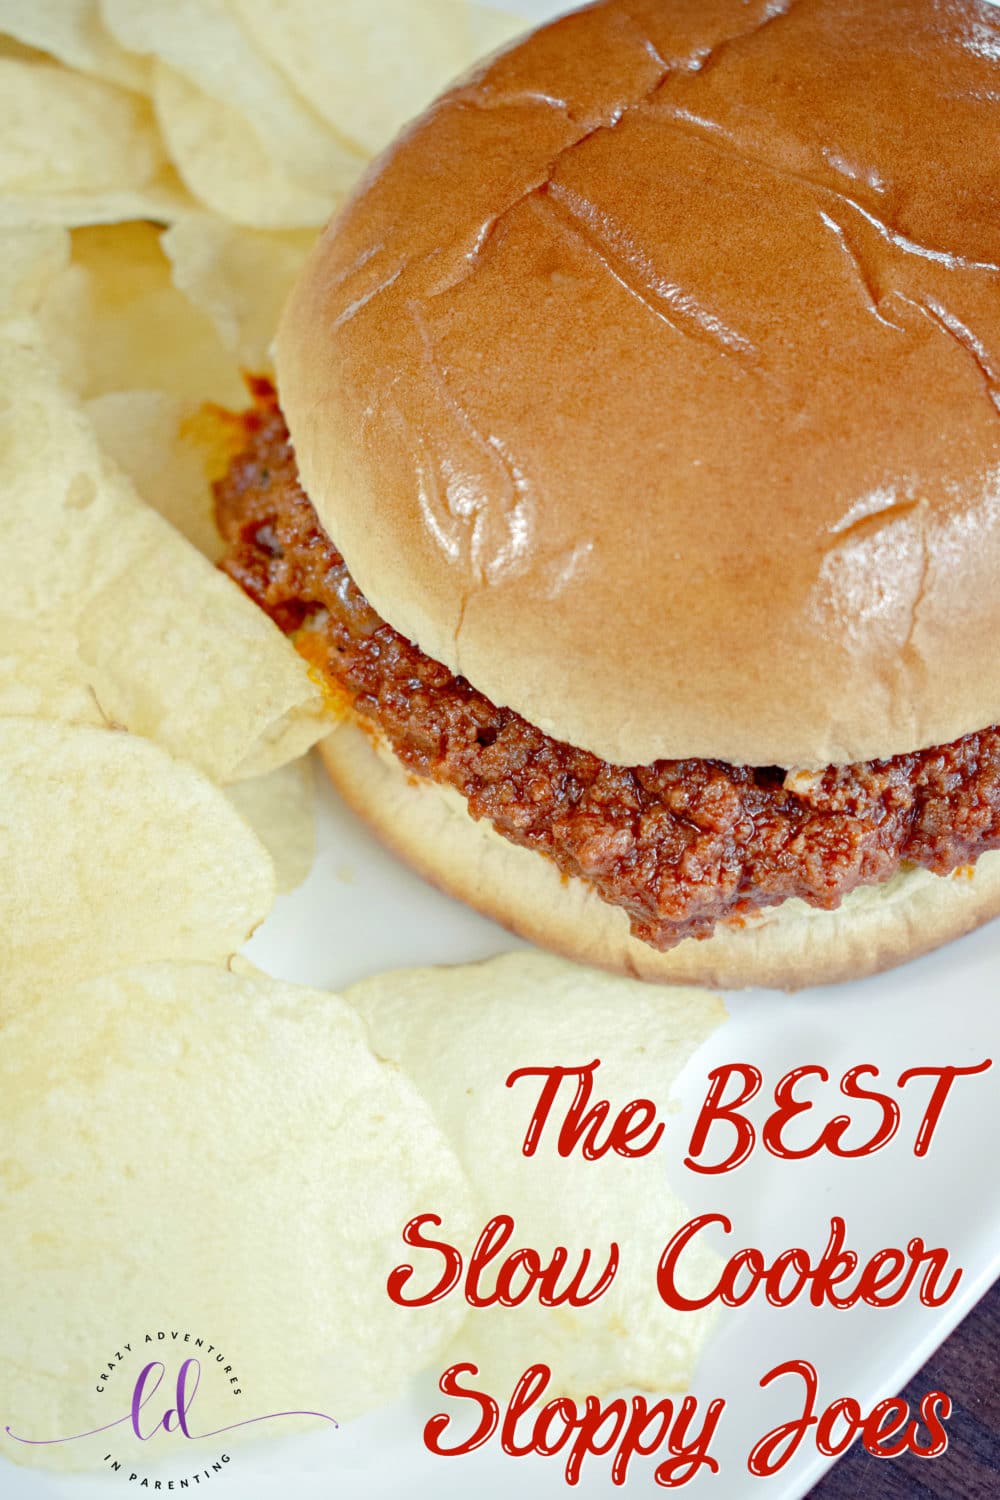 The BEST Slow Cooker Sloppy Joes